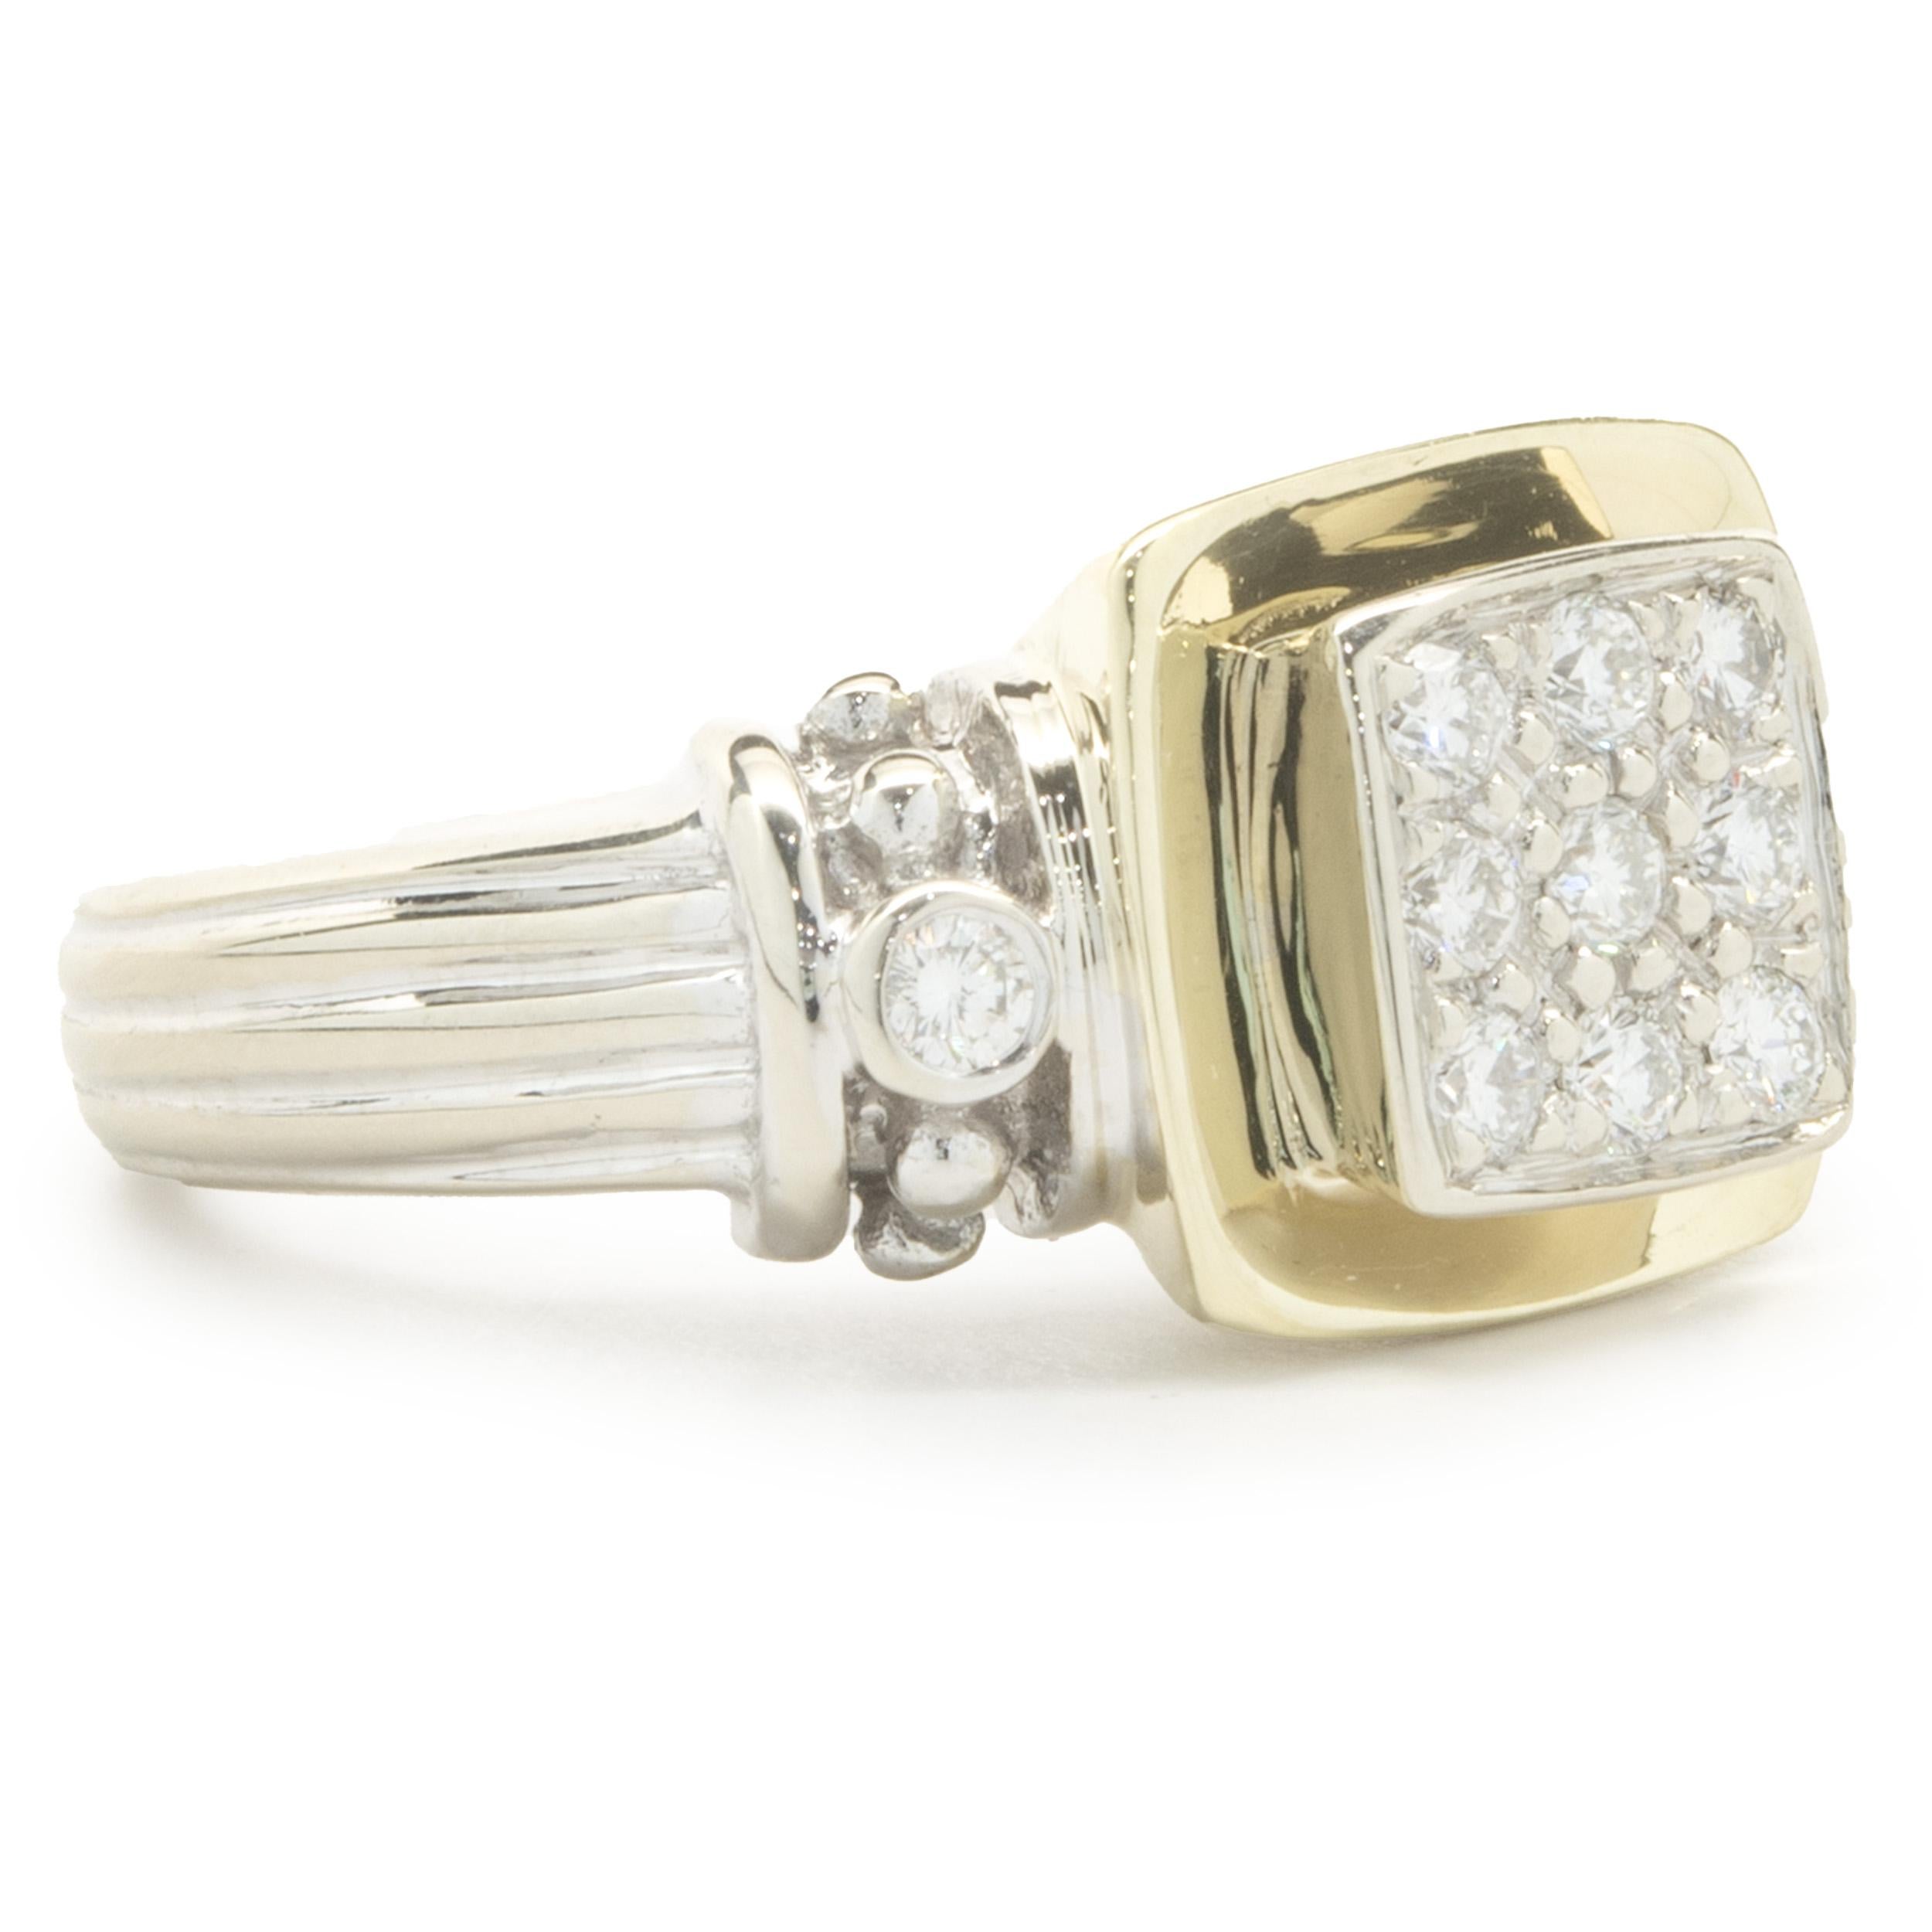 Designer: custom
Material: 14K white & yellow gold
Diamond: 11 round brilliant cut = 0.28cttw
Color: G
Clarity: VS2
Size: 7
Weight: 9.60 grams